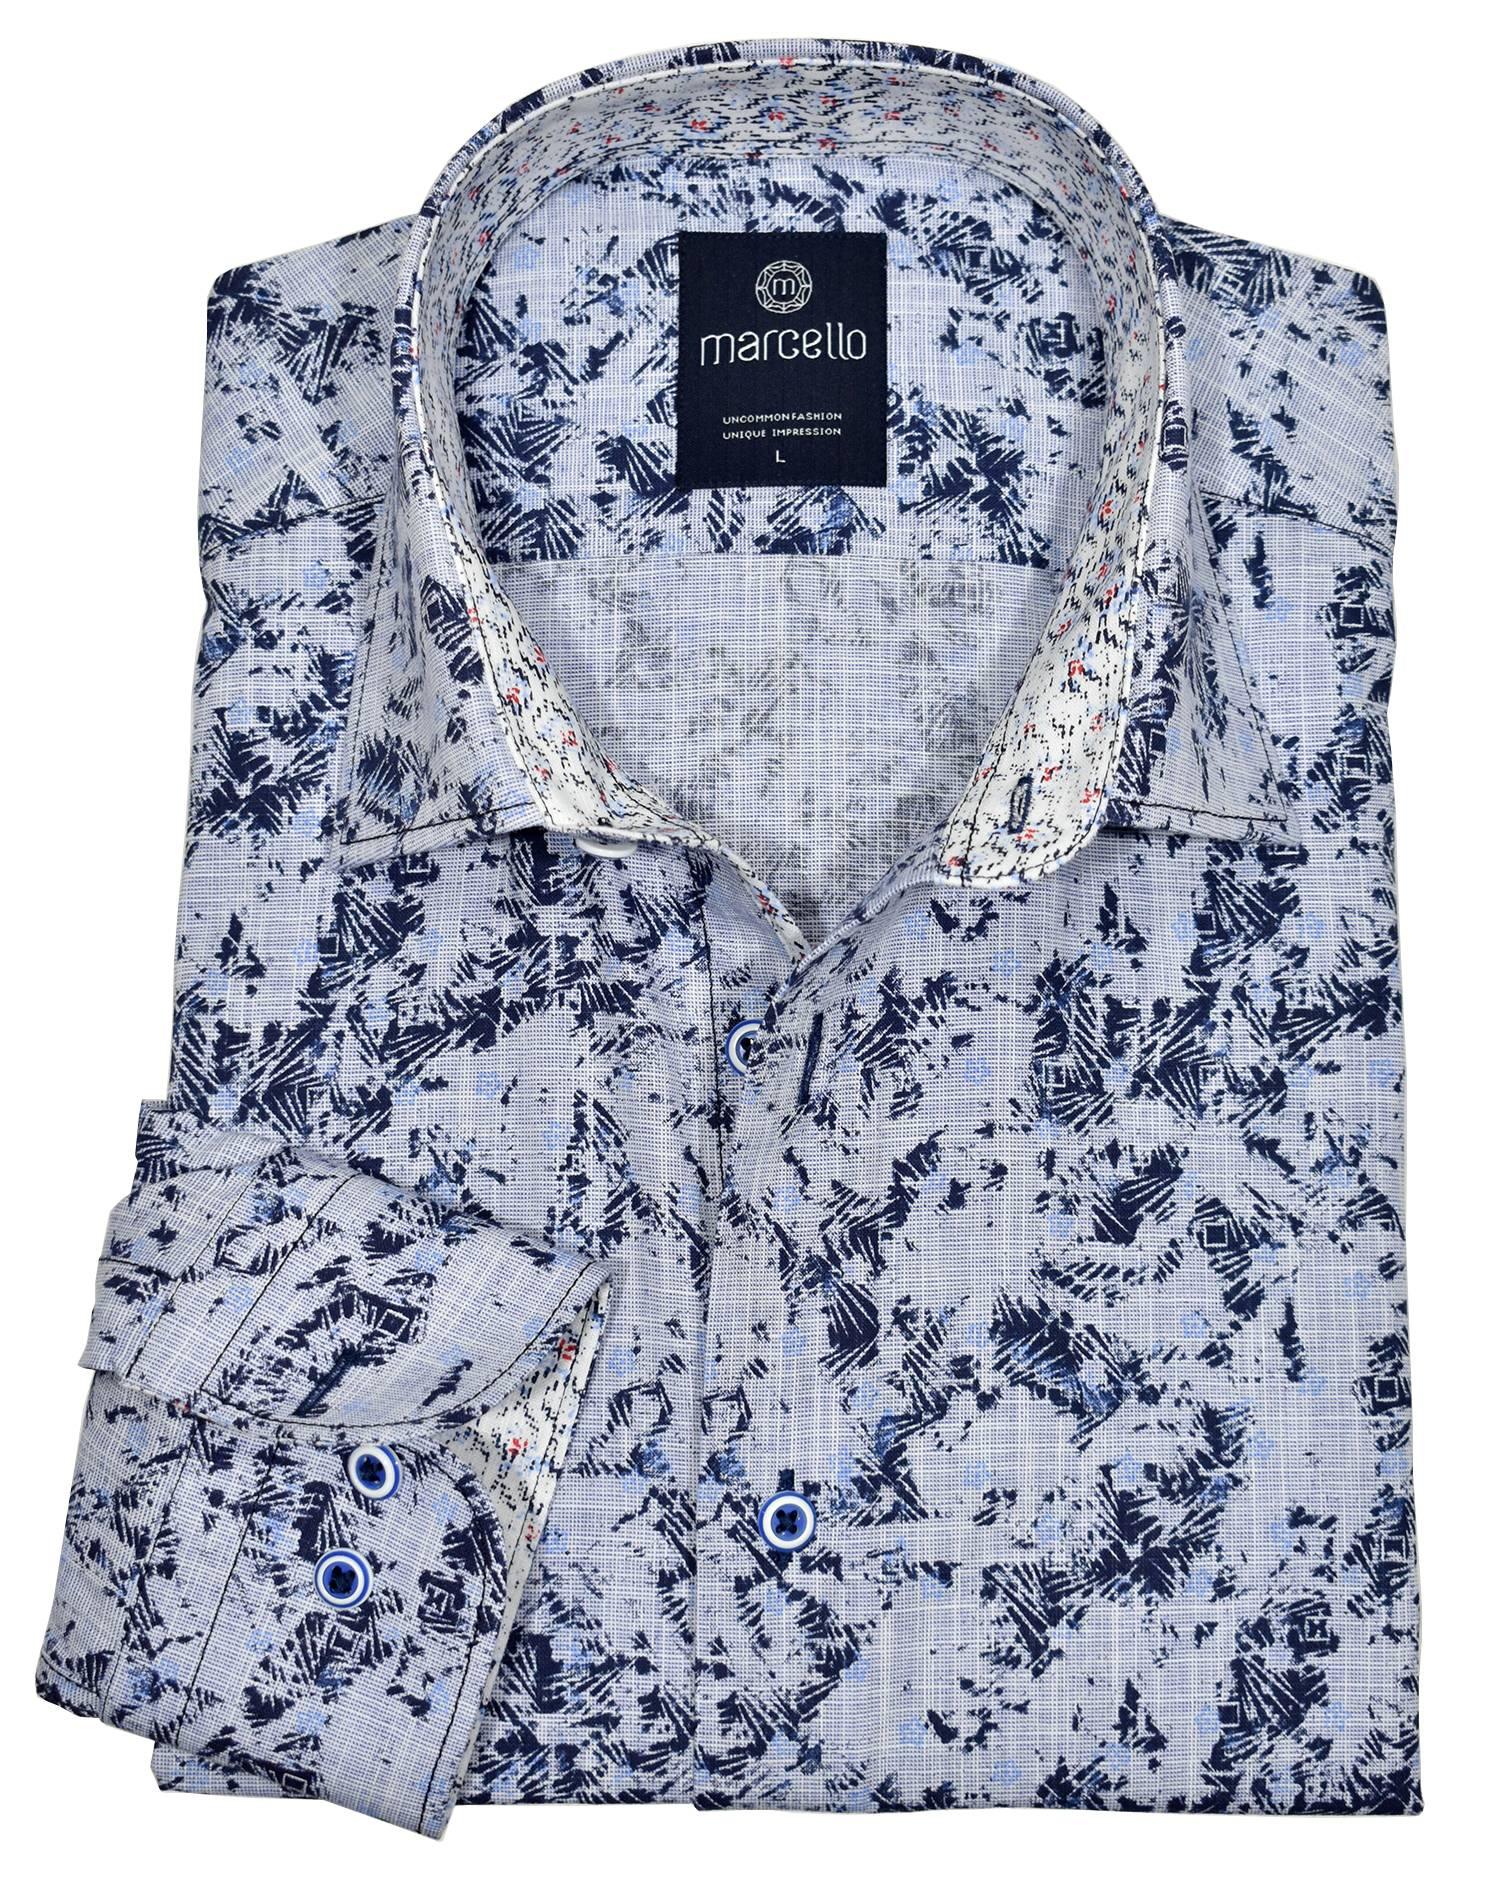 Cotton fabric woven on a linen loom. Soft denim color base with navy abstract print. Excellent sport shirt with jeans, pants or shorts. Classic trim fabric. Custom selected buttons. 2 button signature cuffs. Classic shaped fit. Shirt by Marcello Sport.